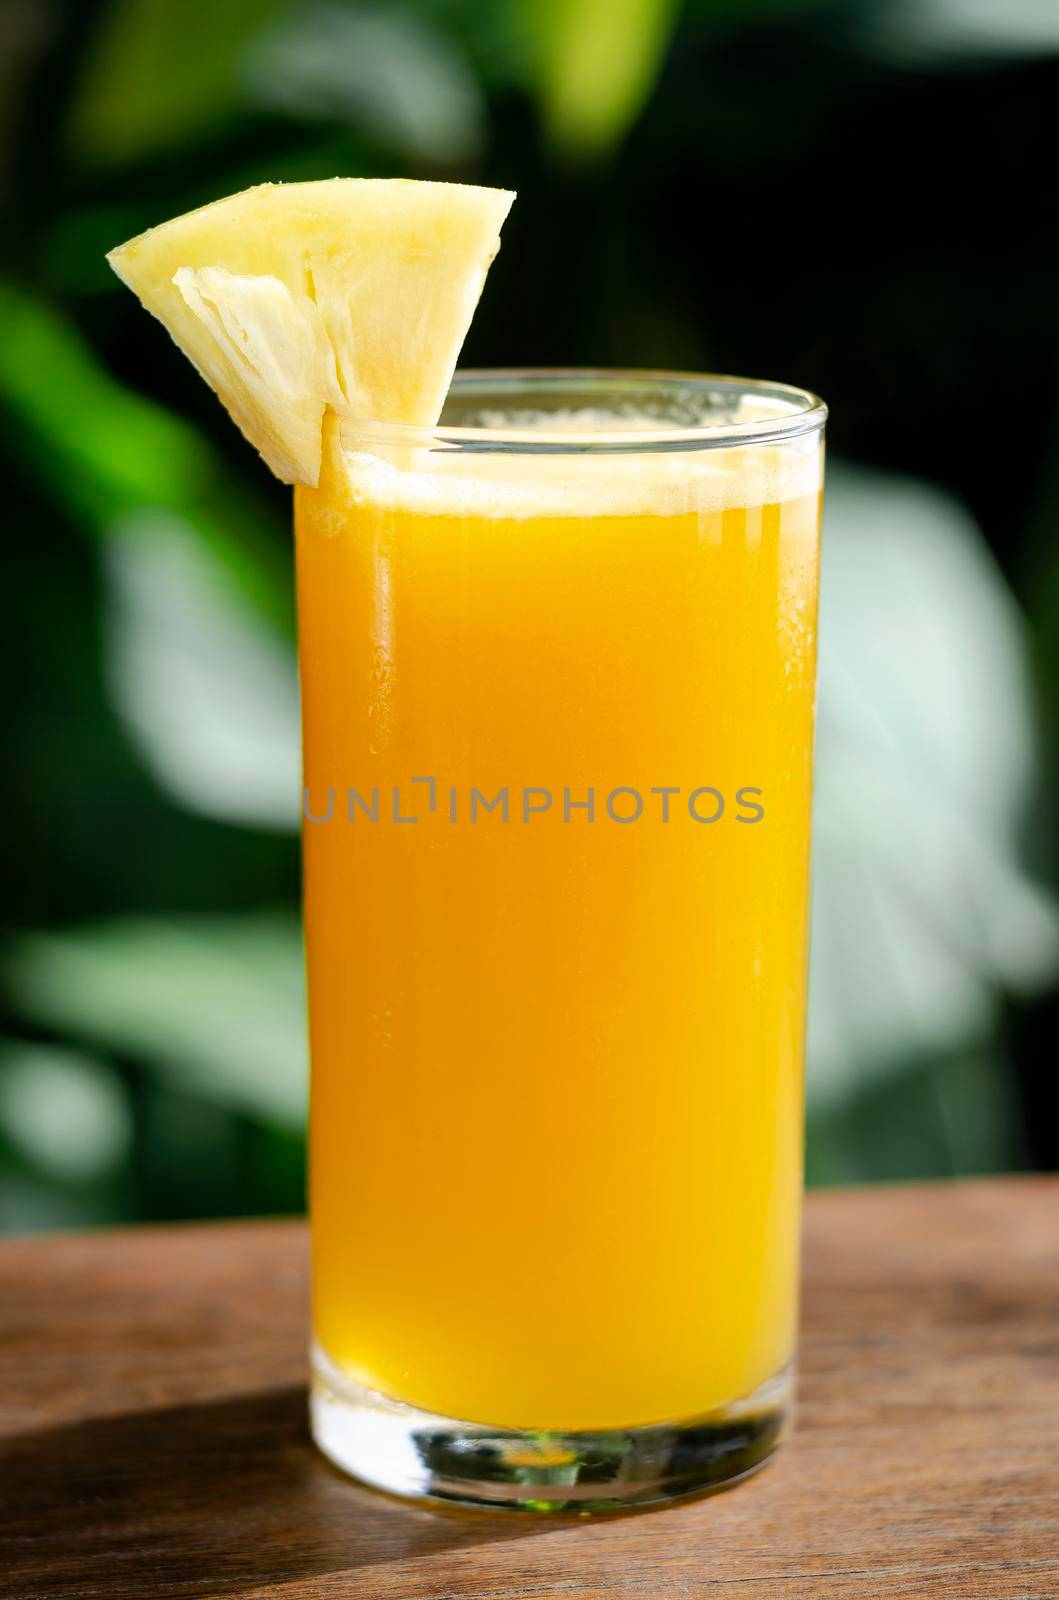 glass of fresh organic pineapple juice on table outdoors on table in sunny garden outdoors